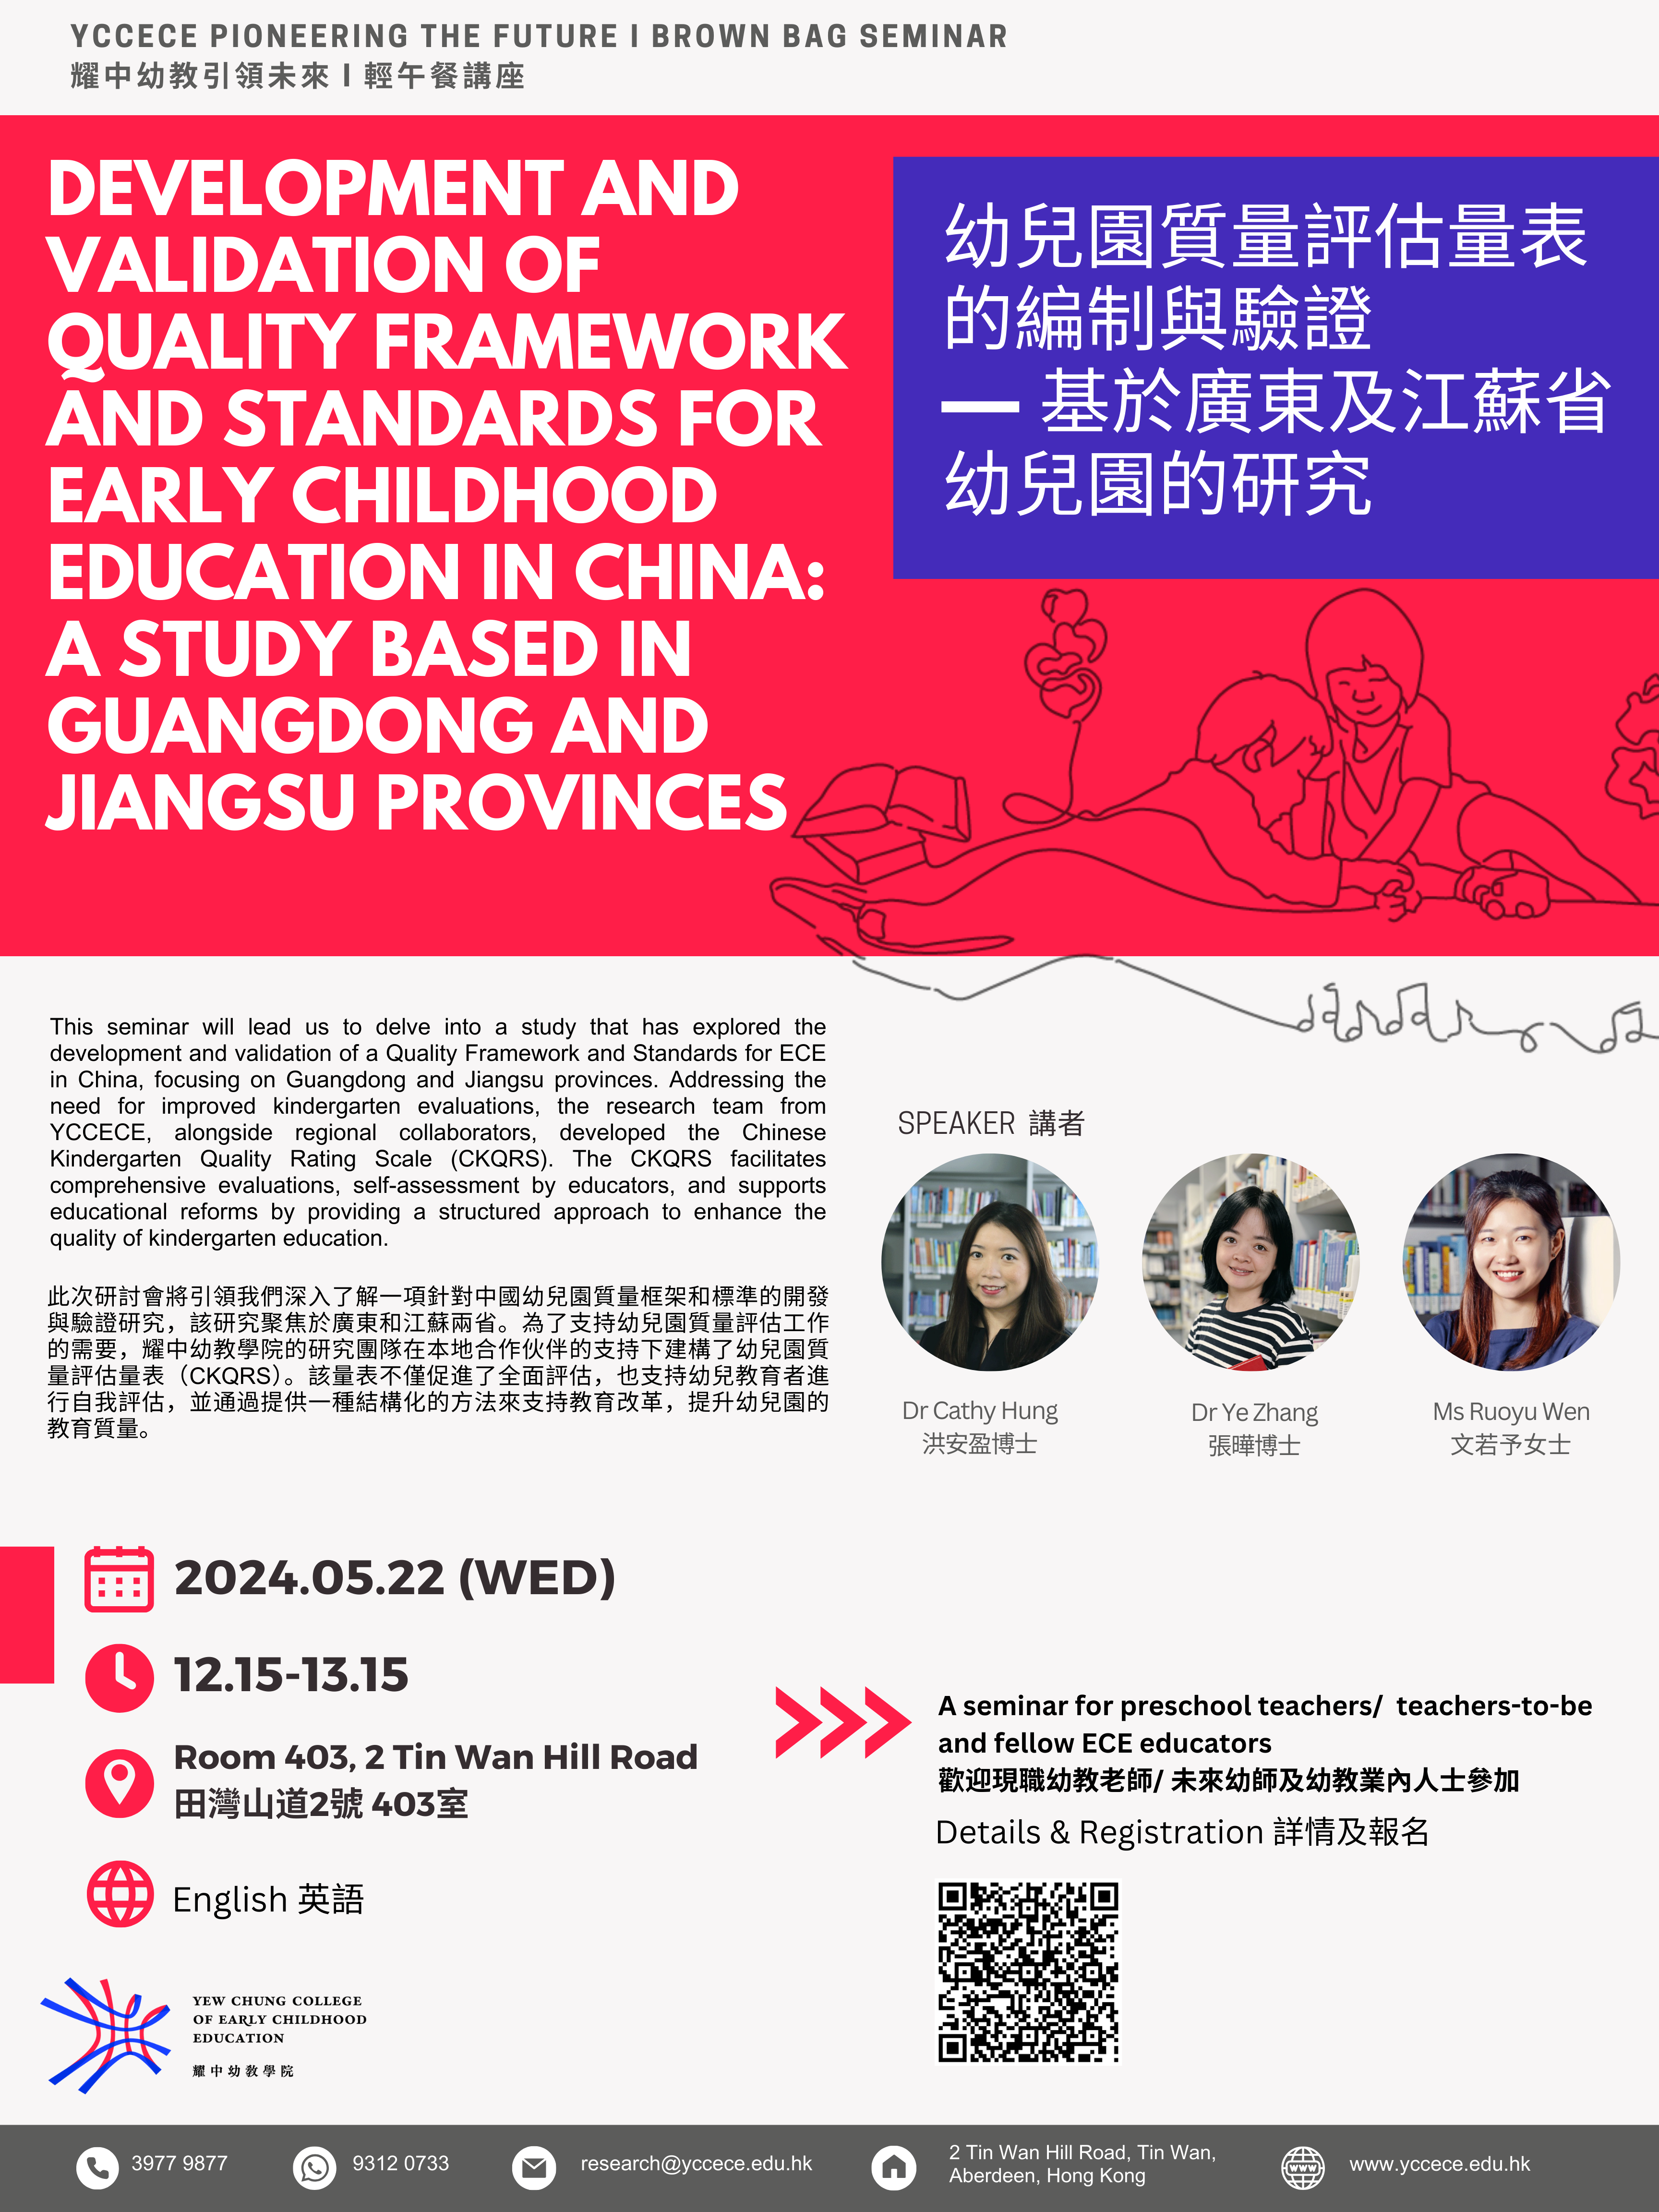 Development and Validation of Quality Framework and Standards for Early Childhood Education in China: A Study Based in Guangdong and Jiangsu Provinces